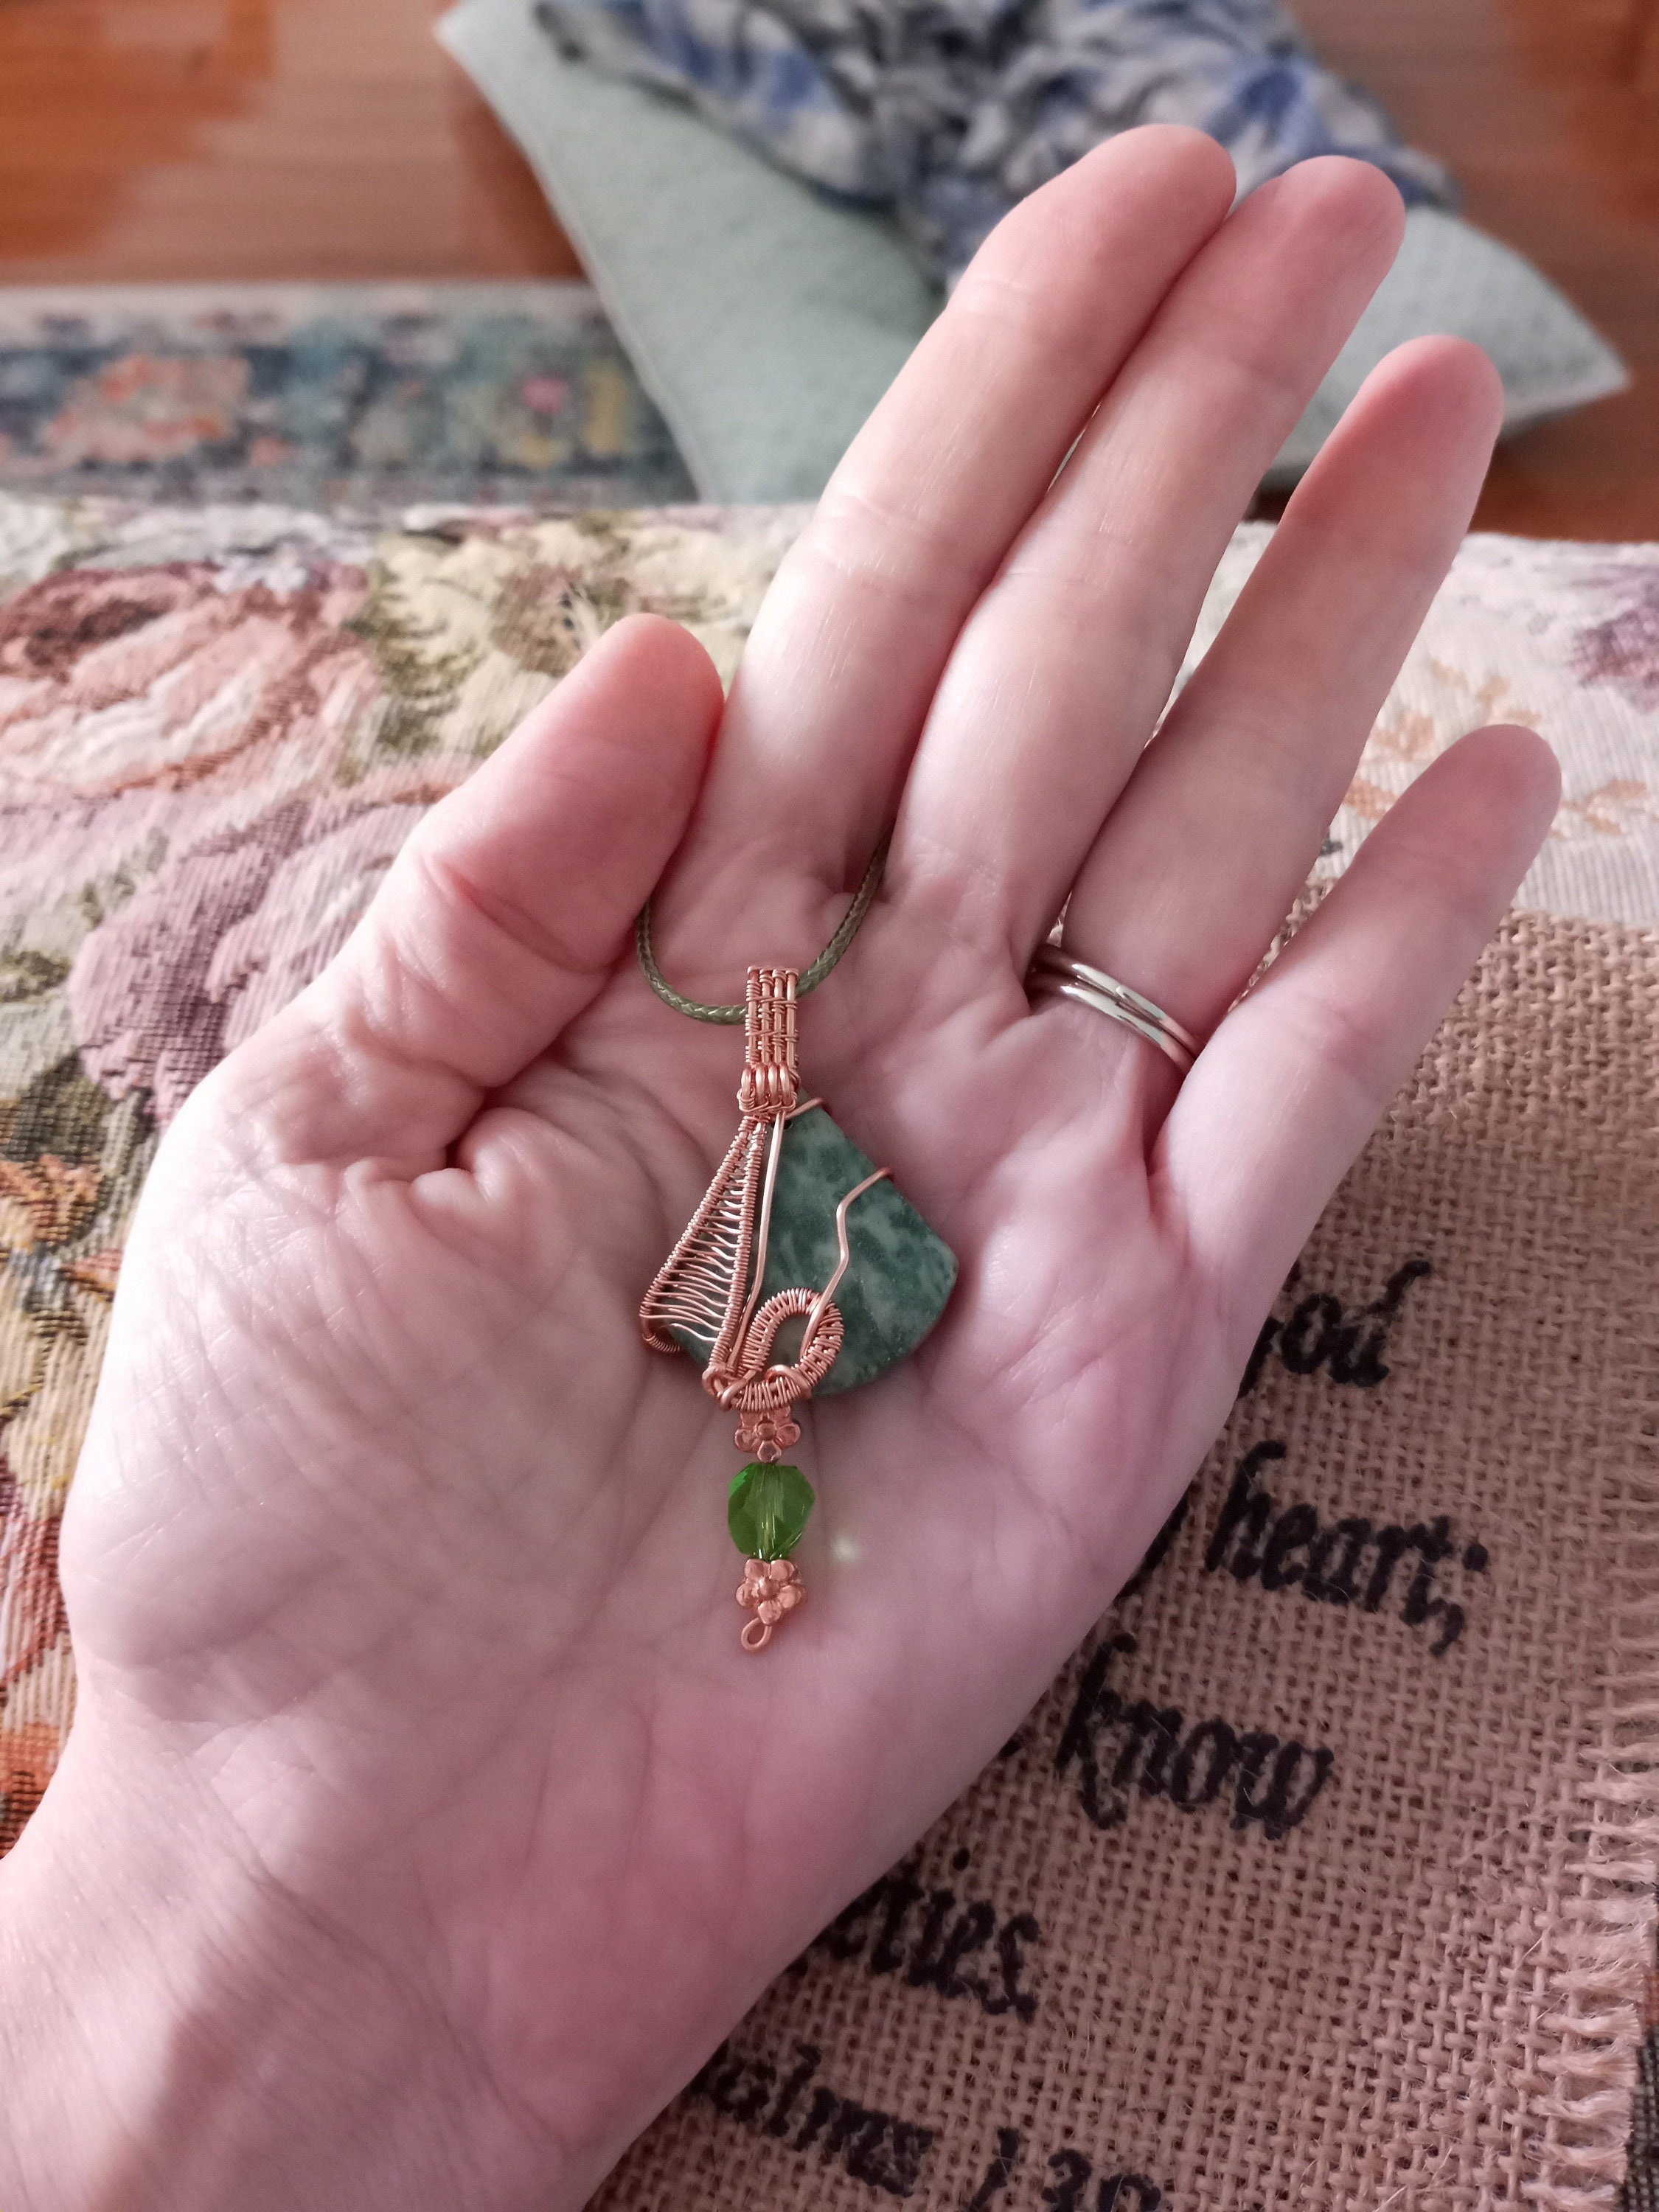 supplied with cord necklace Lovely green triangular stone pendant hand wrapped in woven copper wire